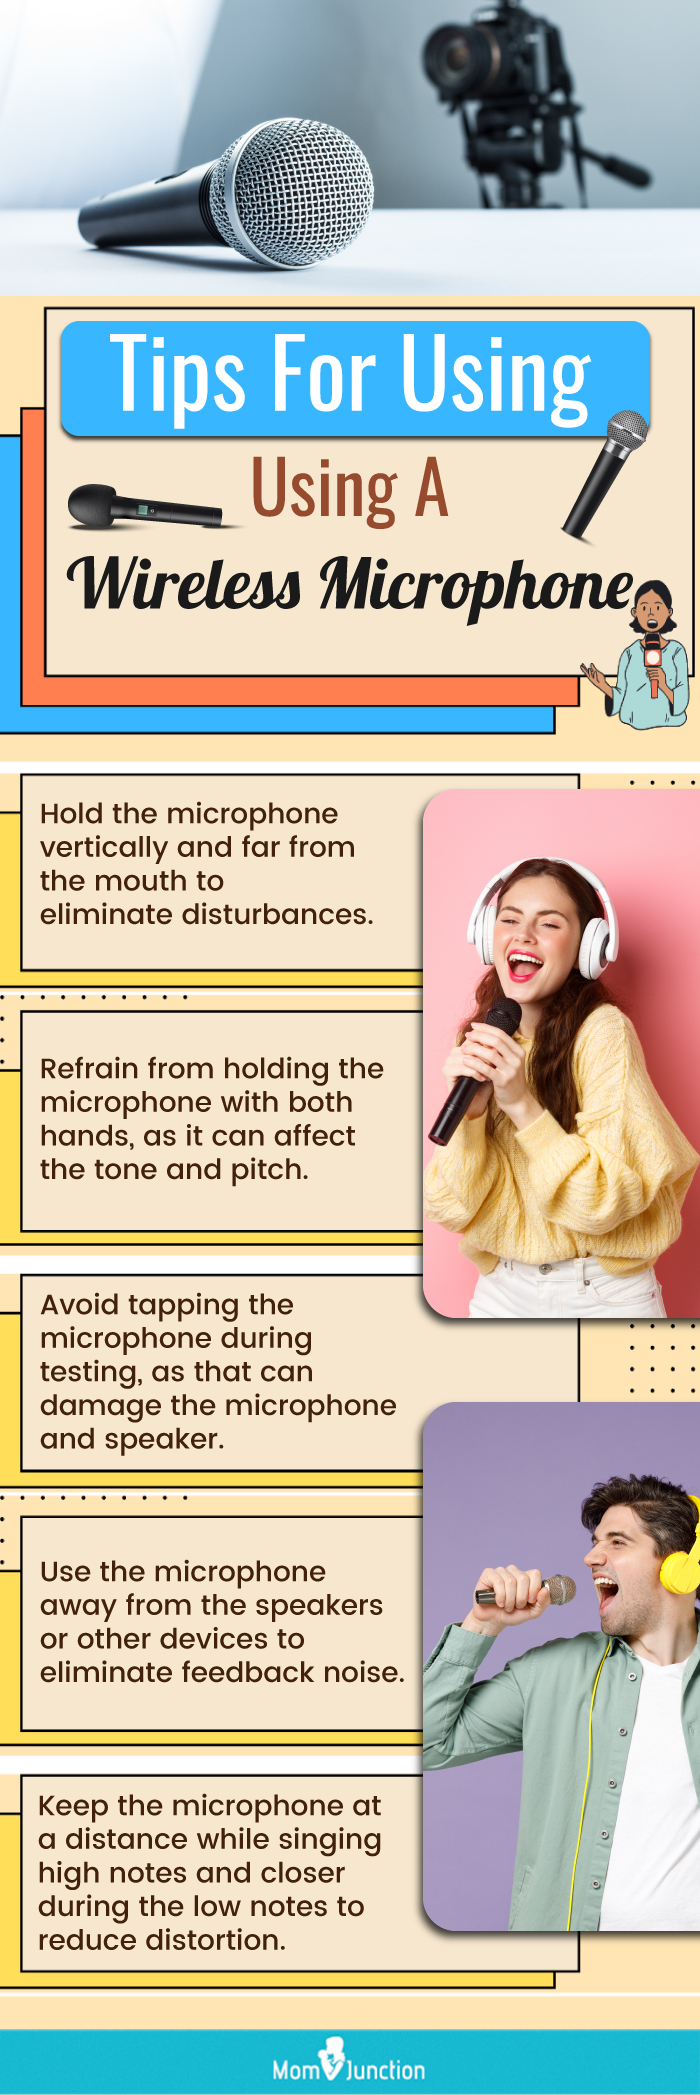 Tips For Using A Wireless Microphone (infographic)